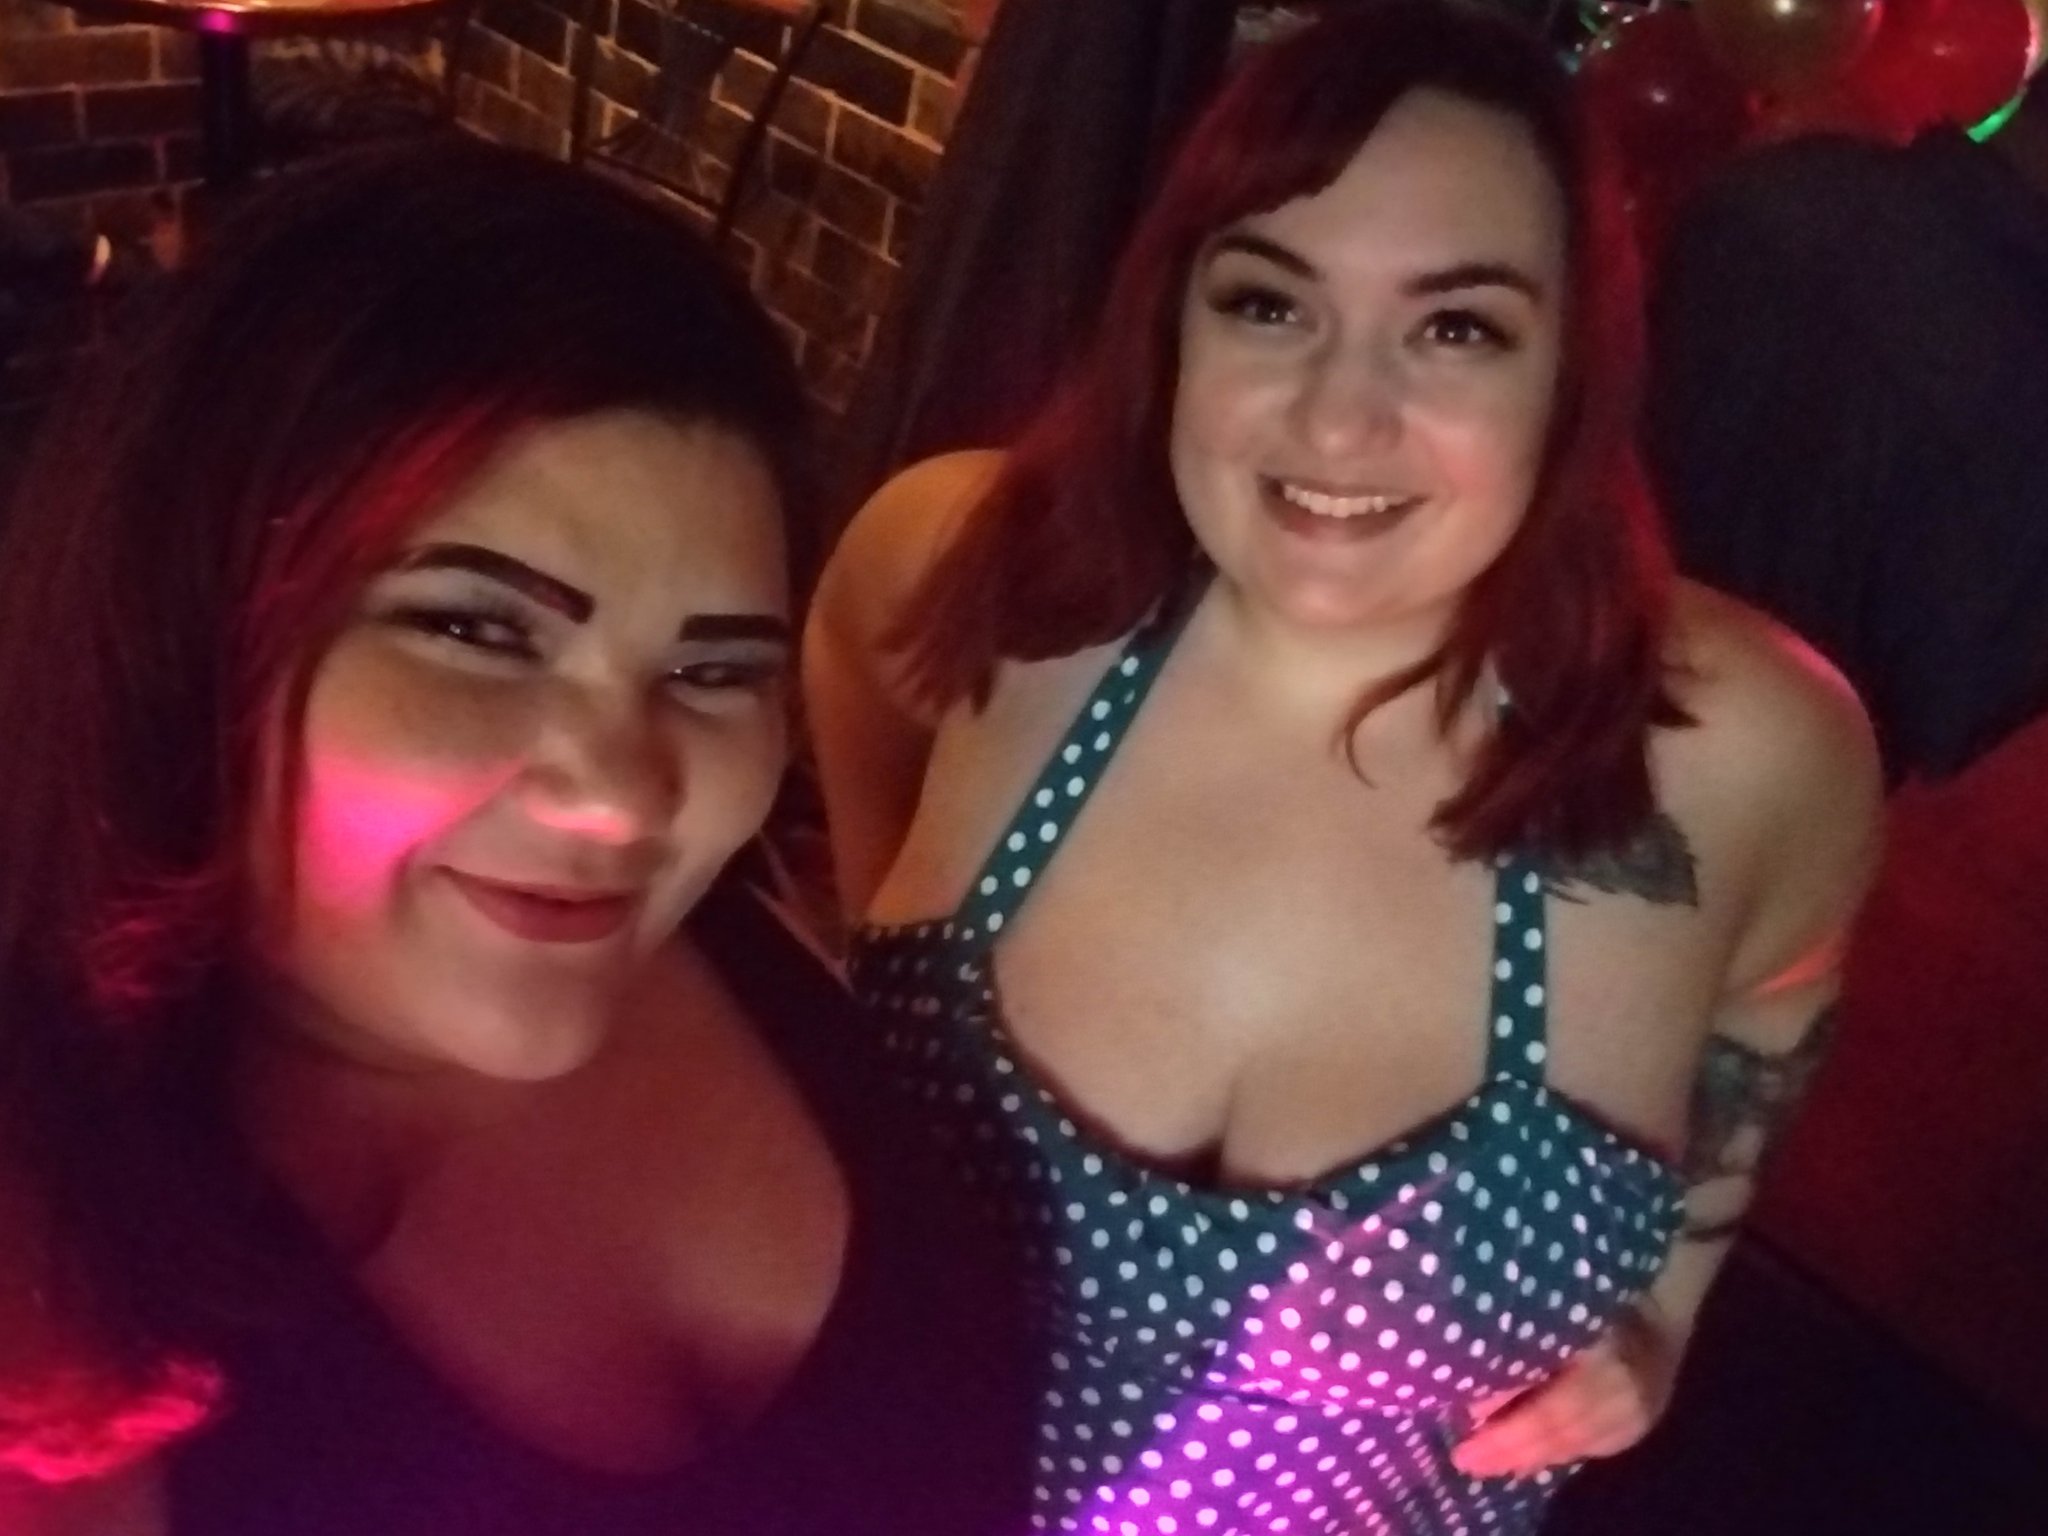 @CurvyQuinn and I 😍 Cant wait to do naughty things with her beautiful self!! https://t.co/1monjJWiPz